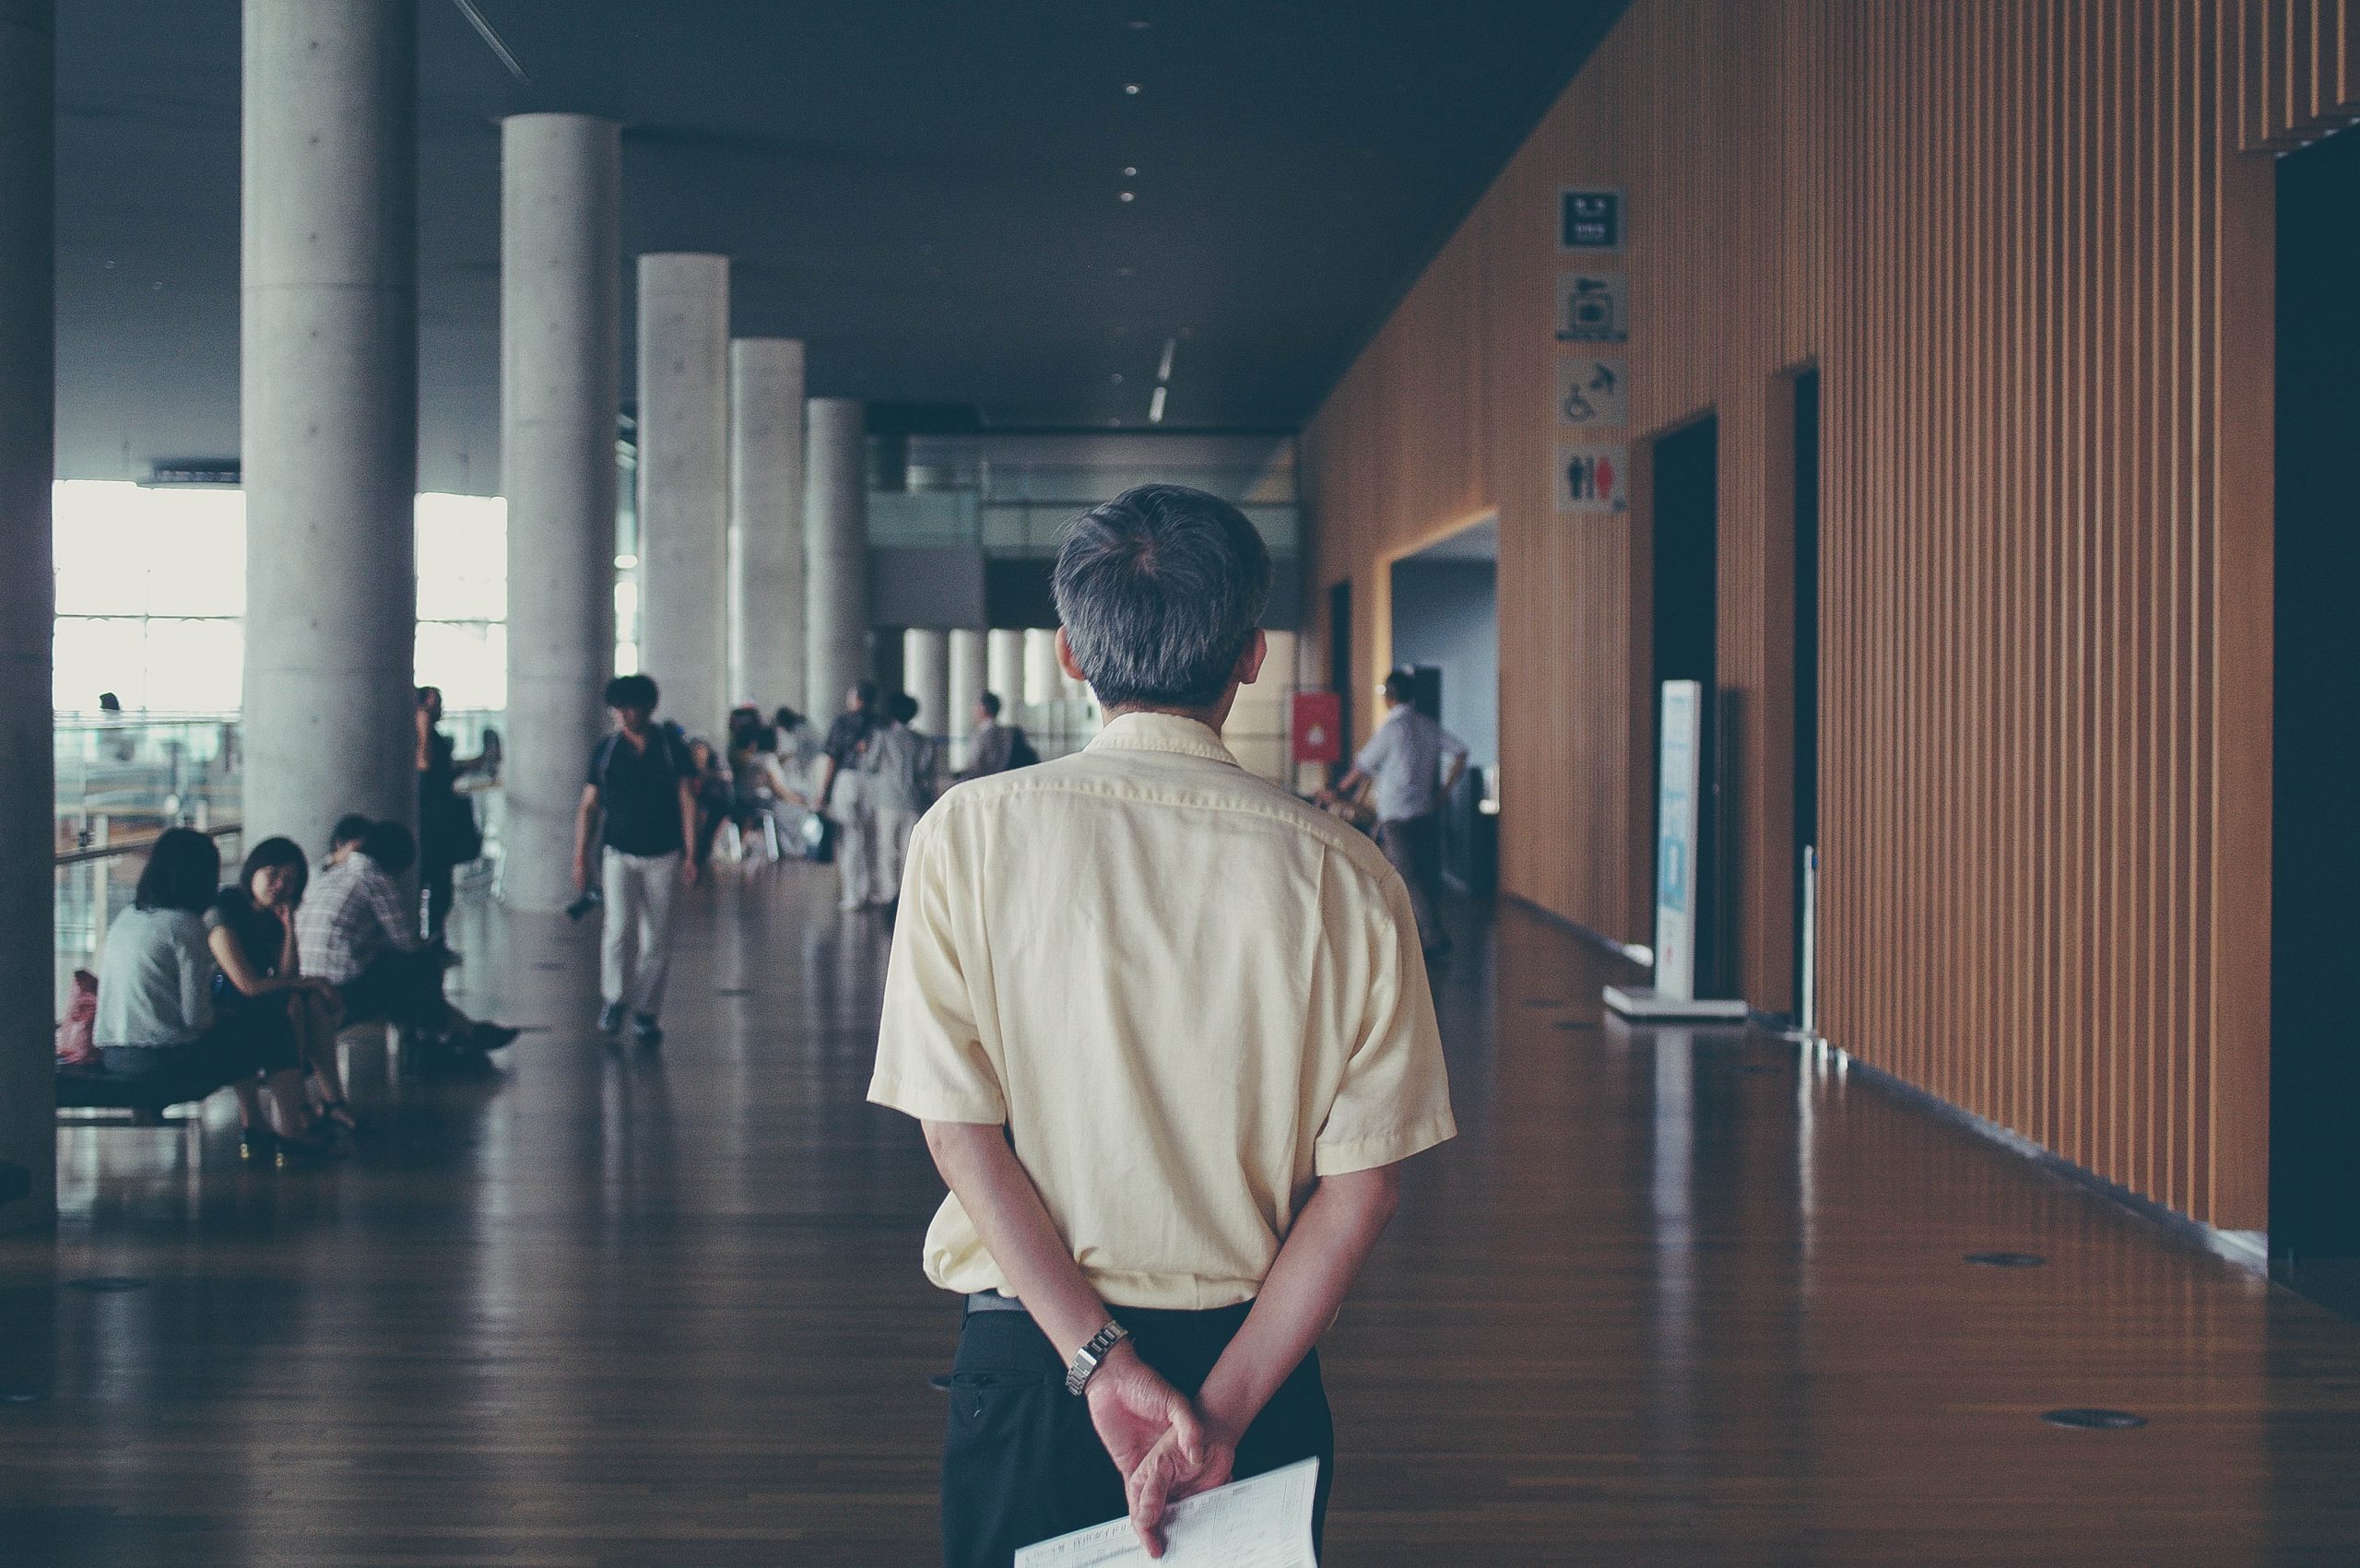 An older man standing in a university, representing an older teacher denied health benefits due to age